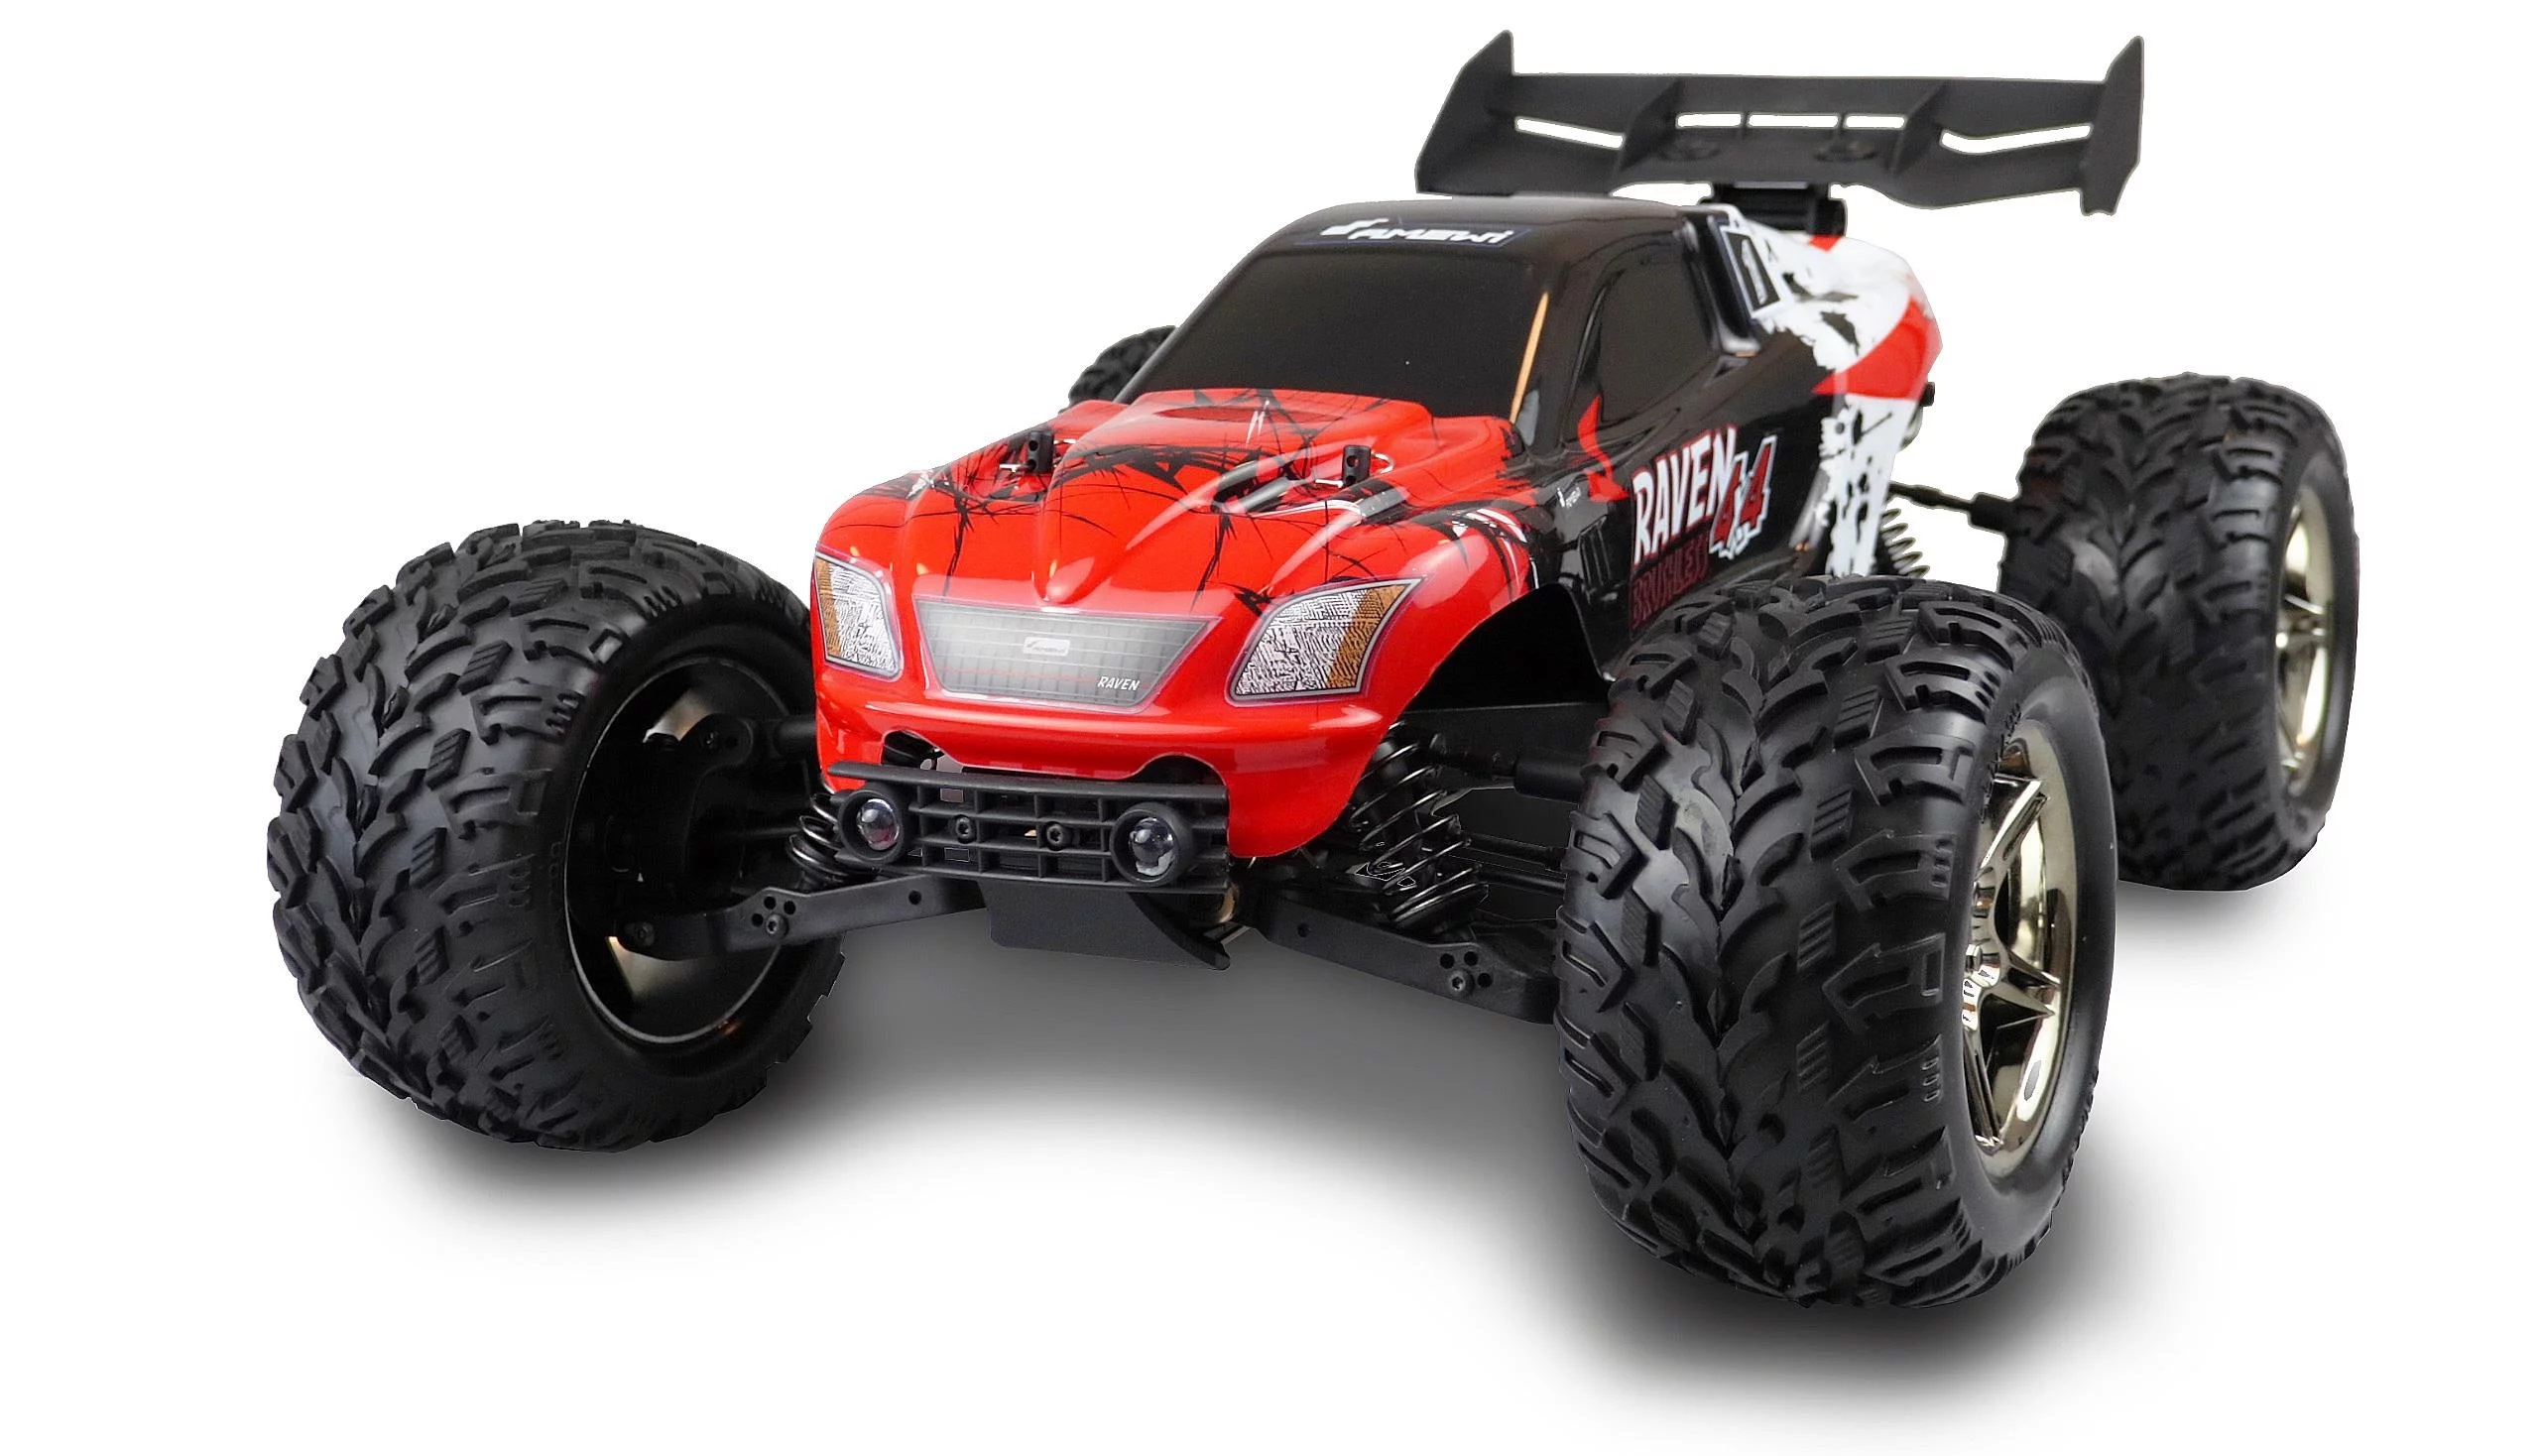 Amewi | Raven 4x4 Monster Truck | 1:10 | Brushless | RTR